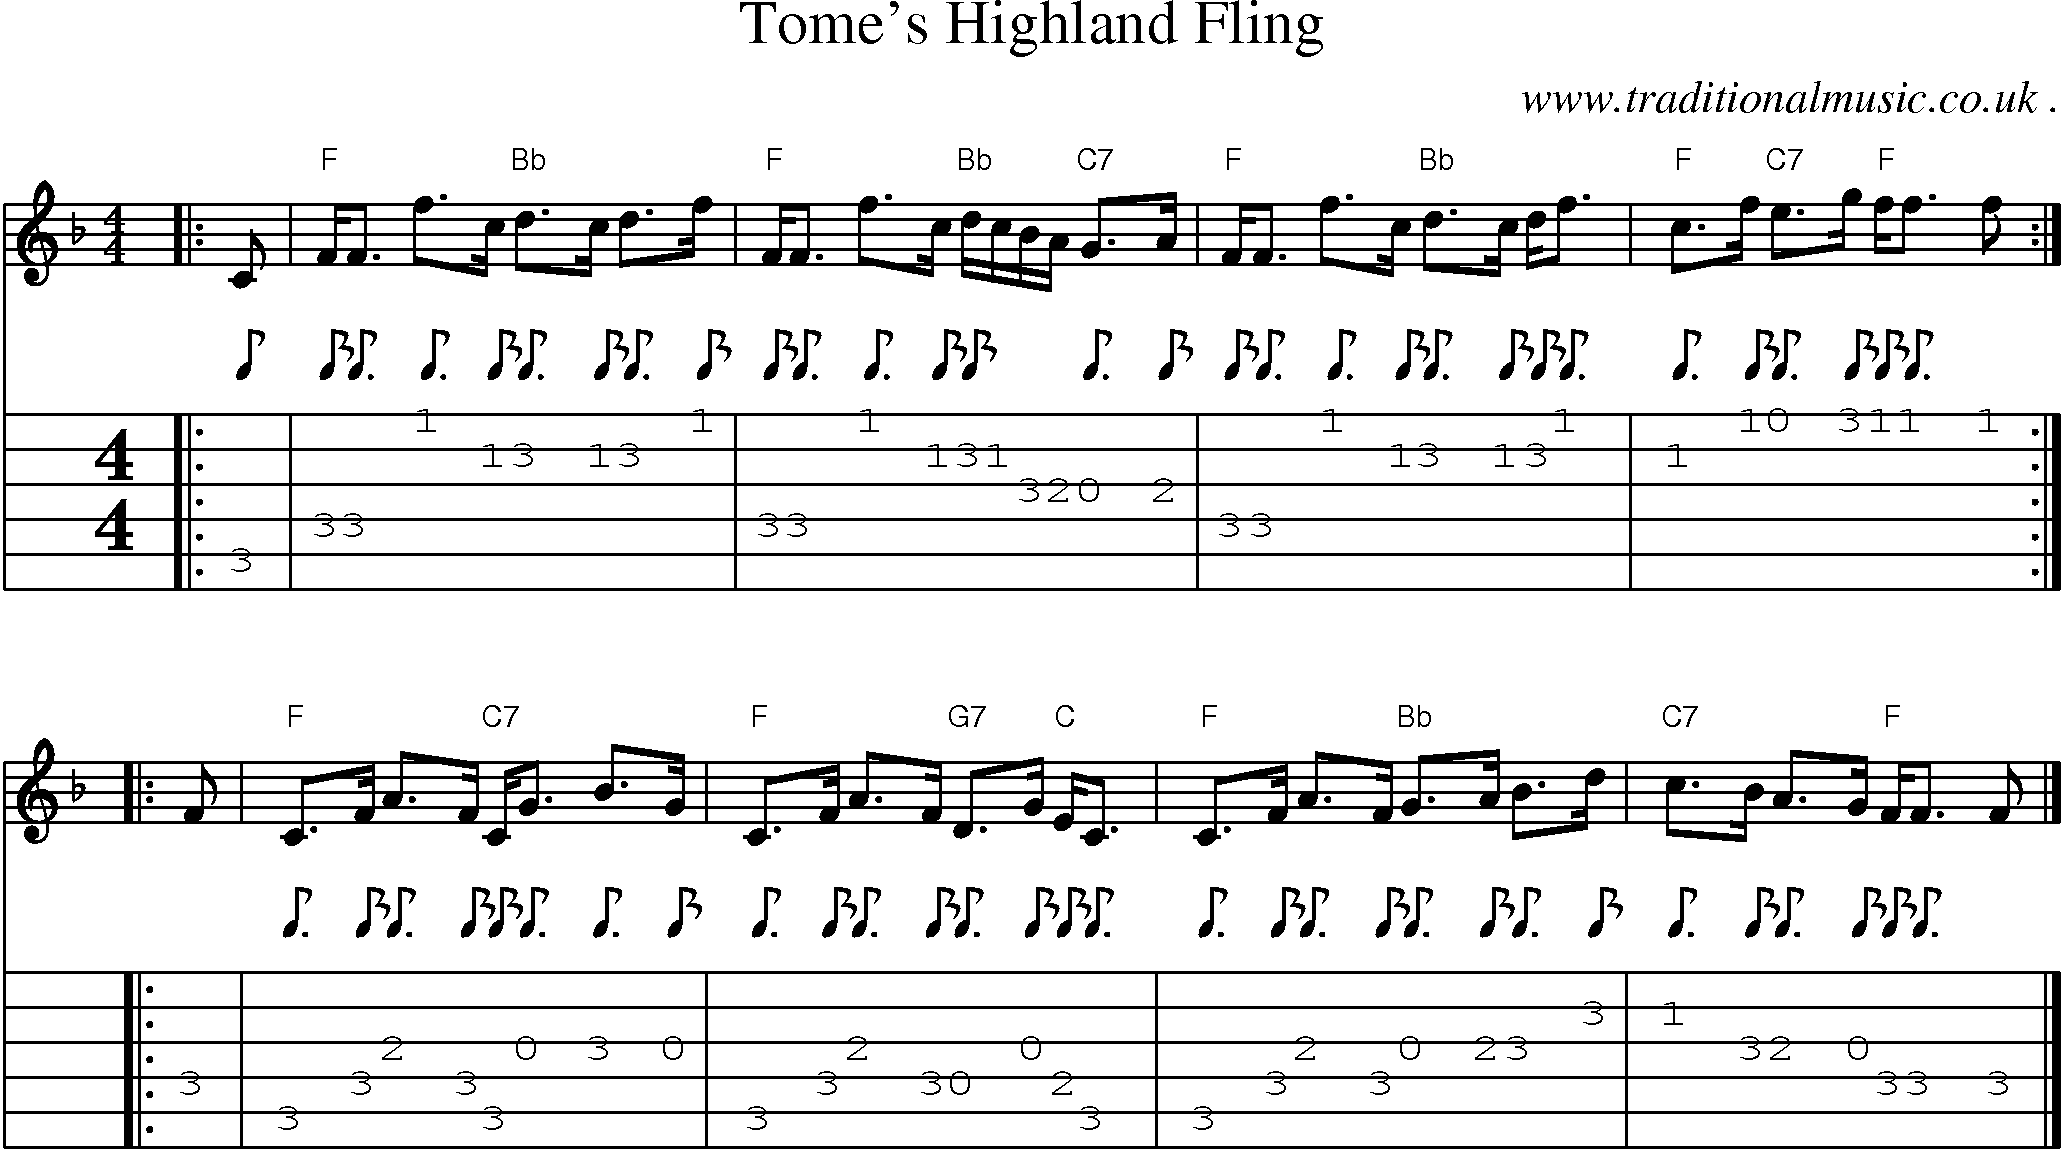 Sheet-music  score, Chords and Guitar Tabs for Tomes Highland Fling